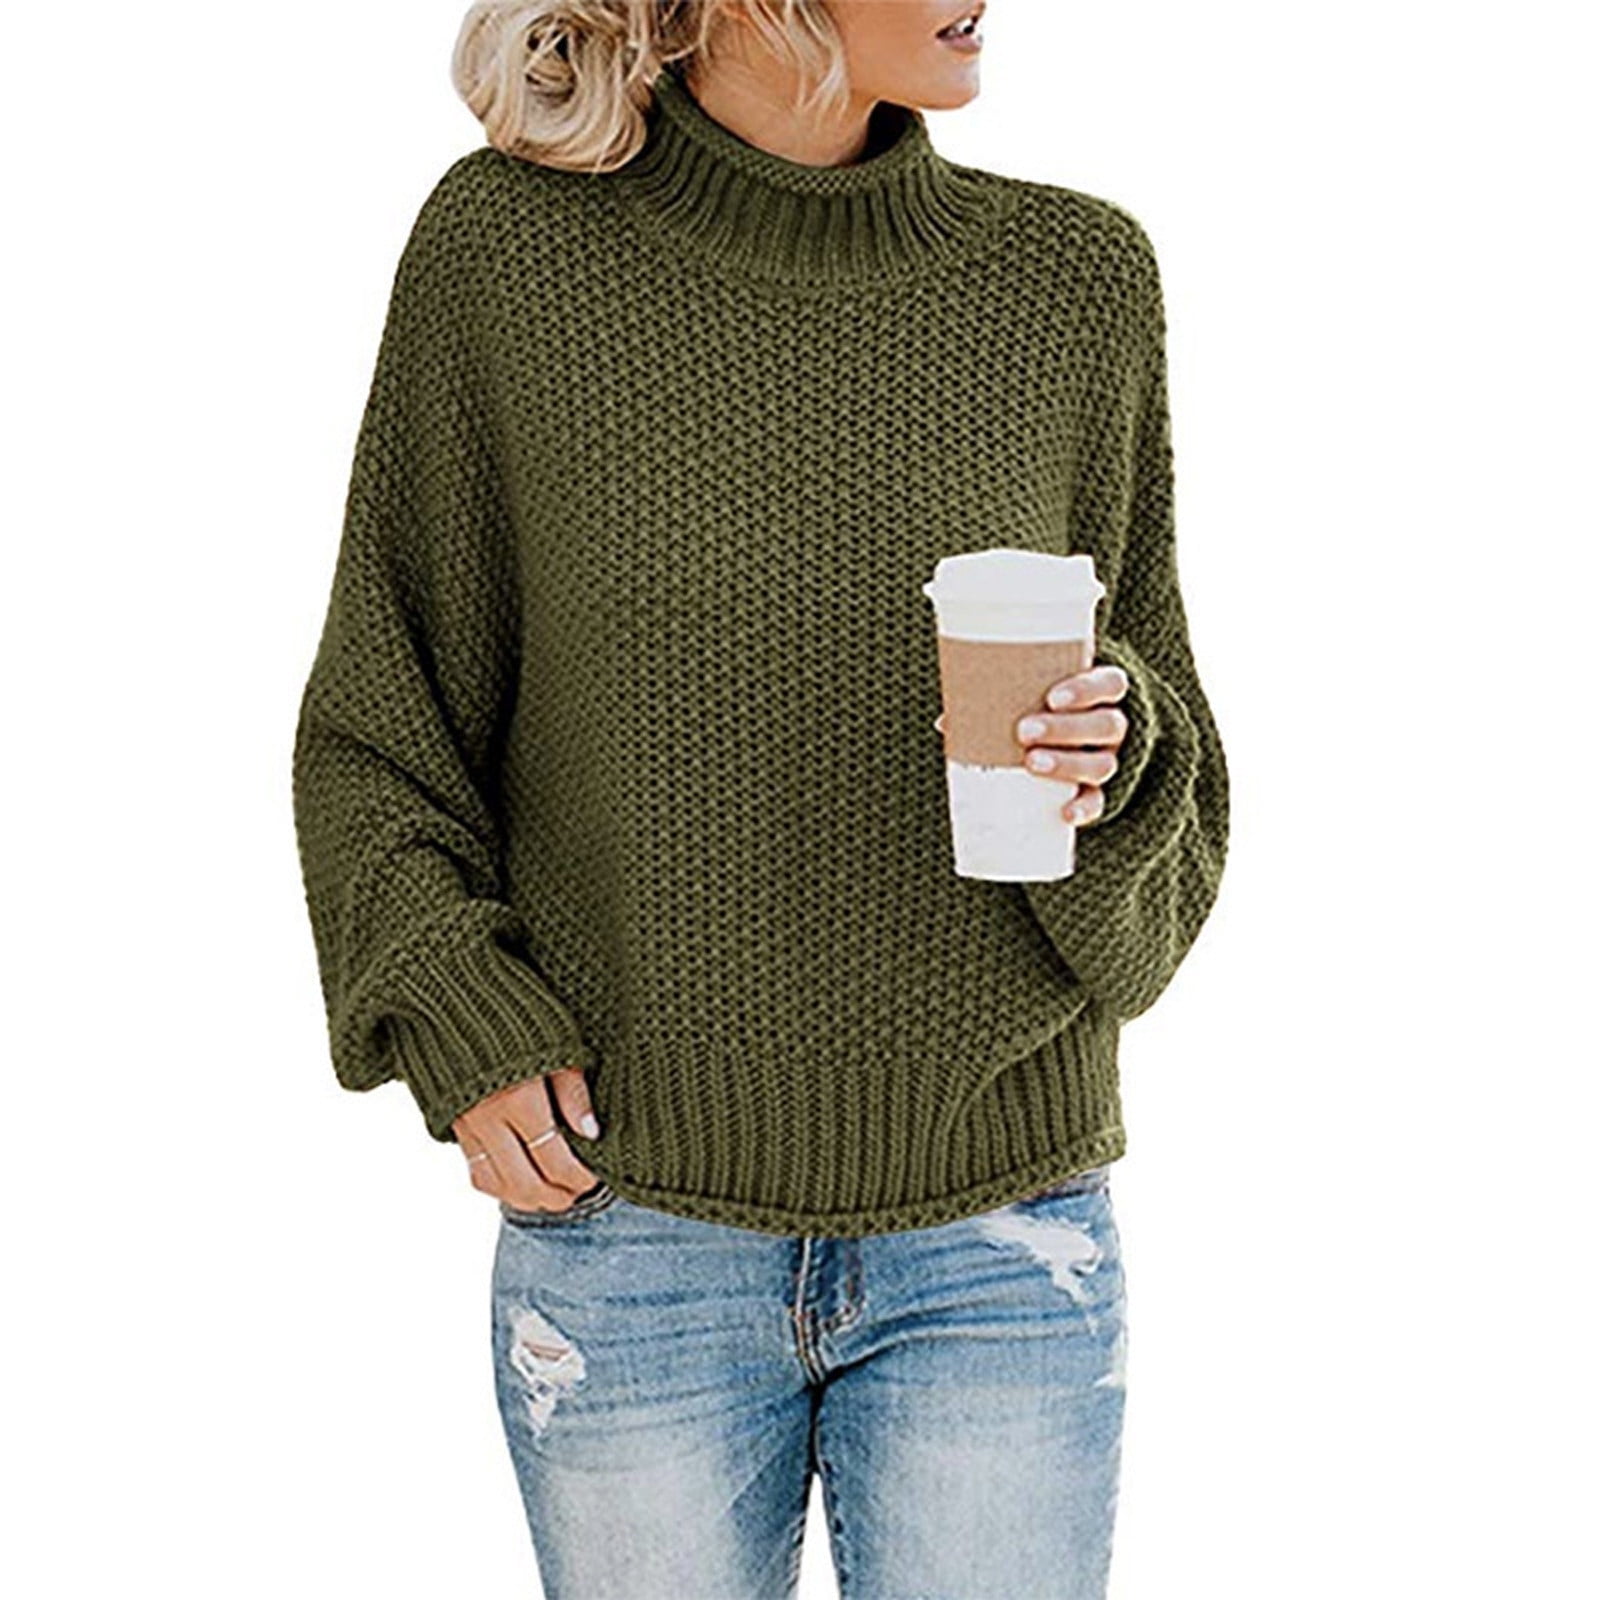 Lastesso Womens Solid Color Knitted Sweater Fitted Crew Neck Sweater ...